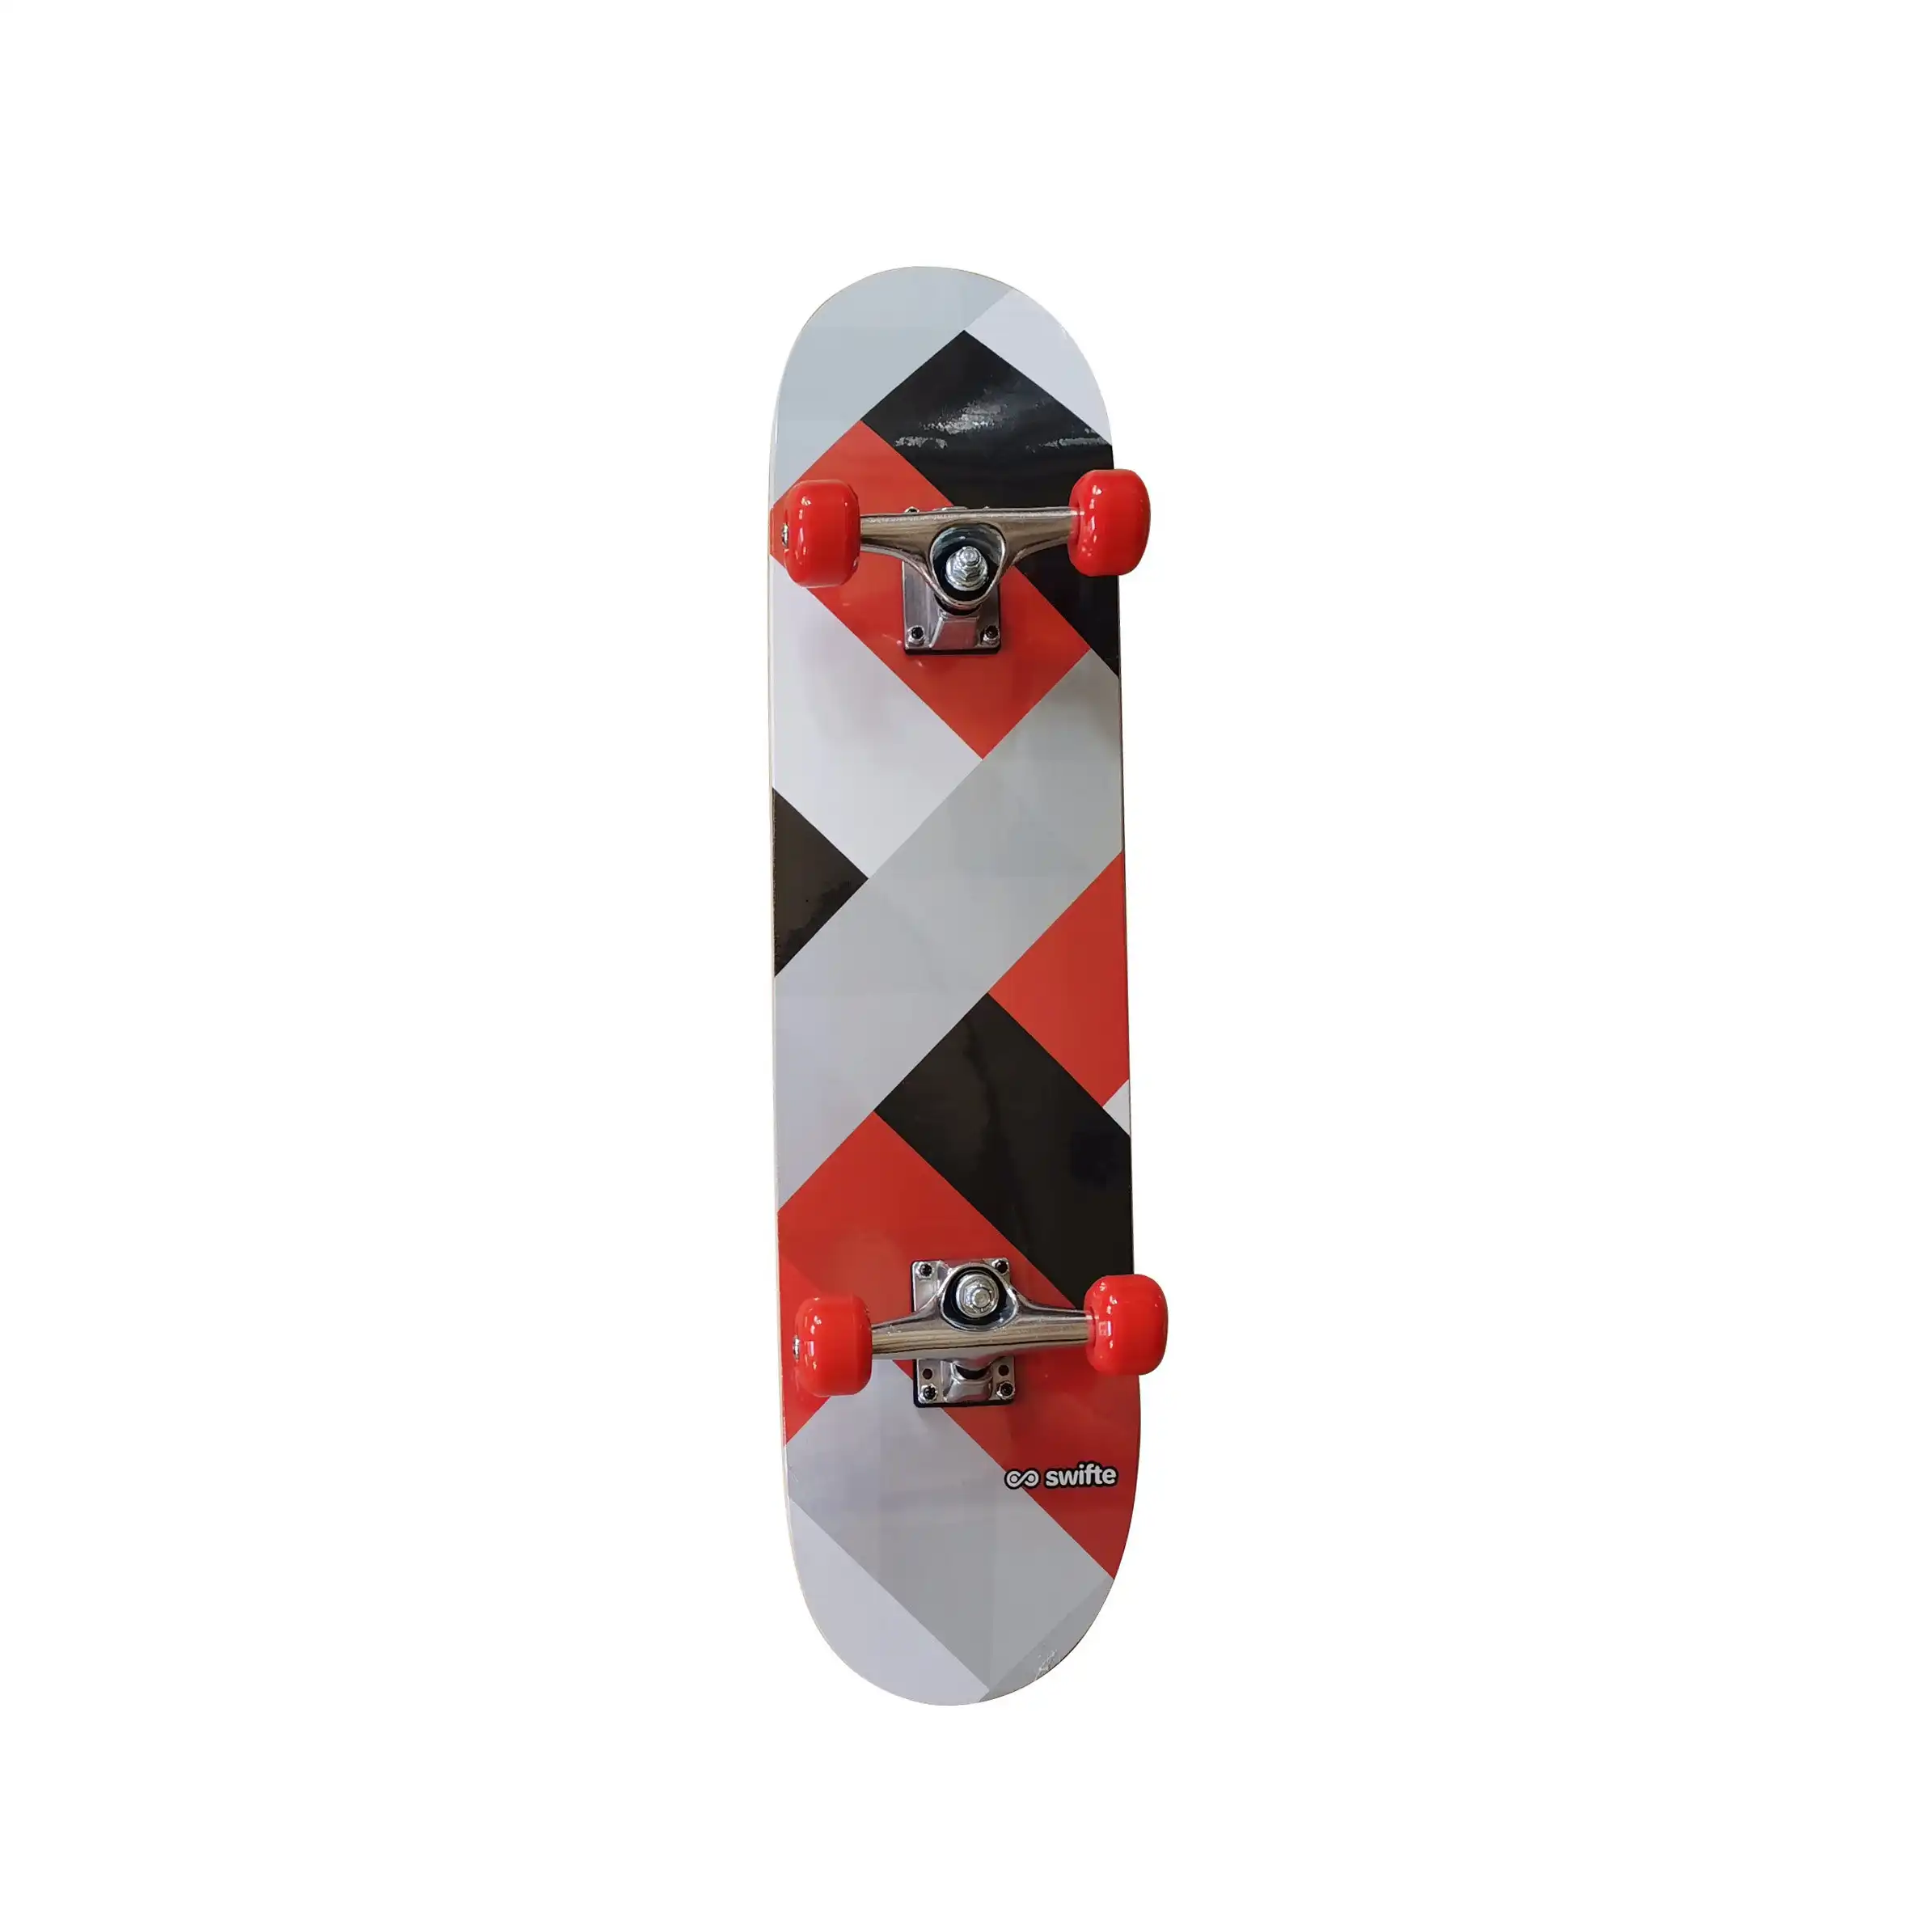 Swifte 31 X 7.75" Skateboard - Red And Black